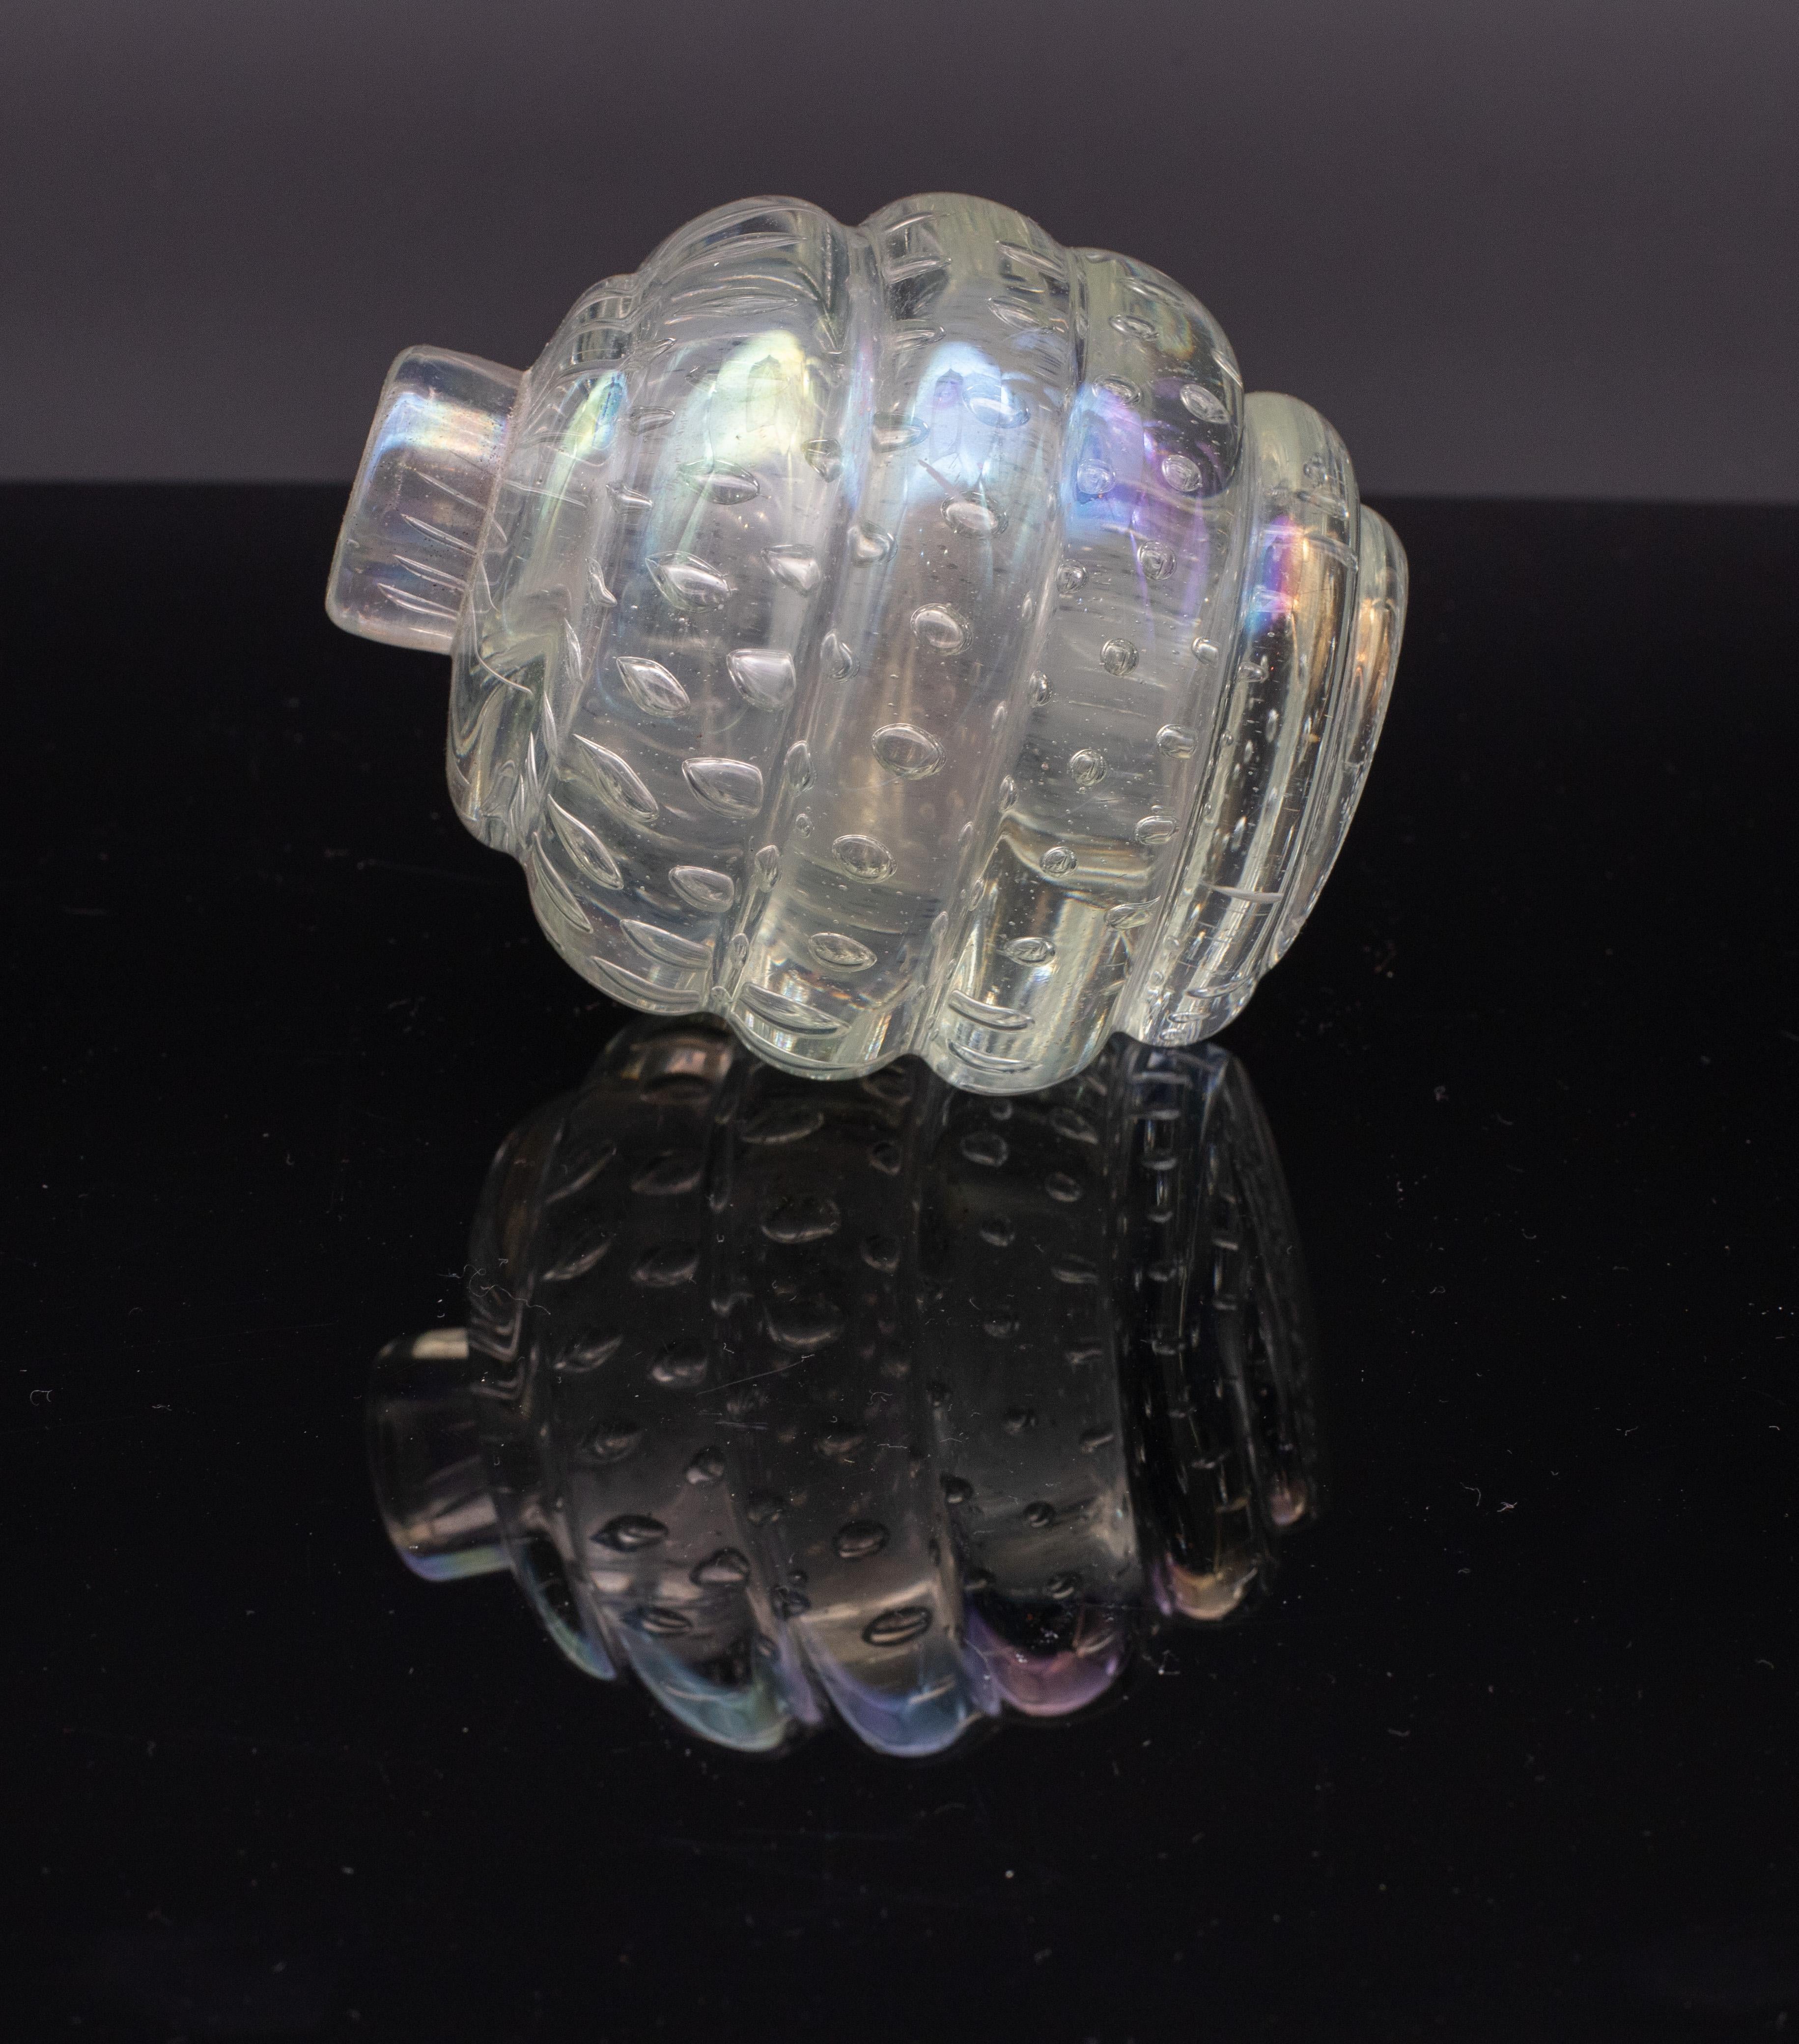 Bubbles Iridescent Vase by Barovier e Toso, 1950s For Sale 2